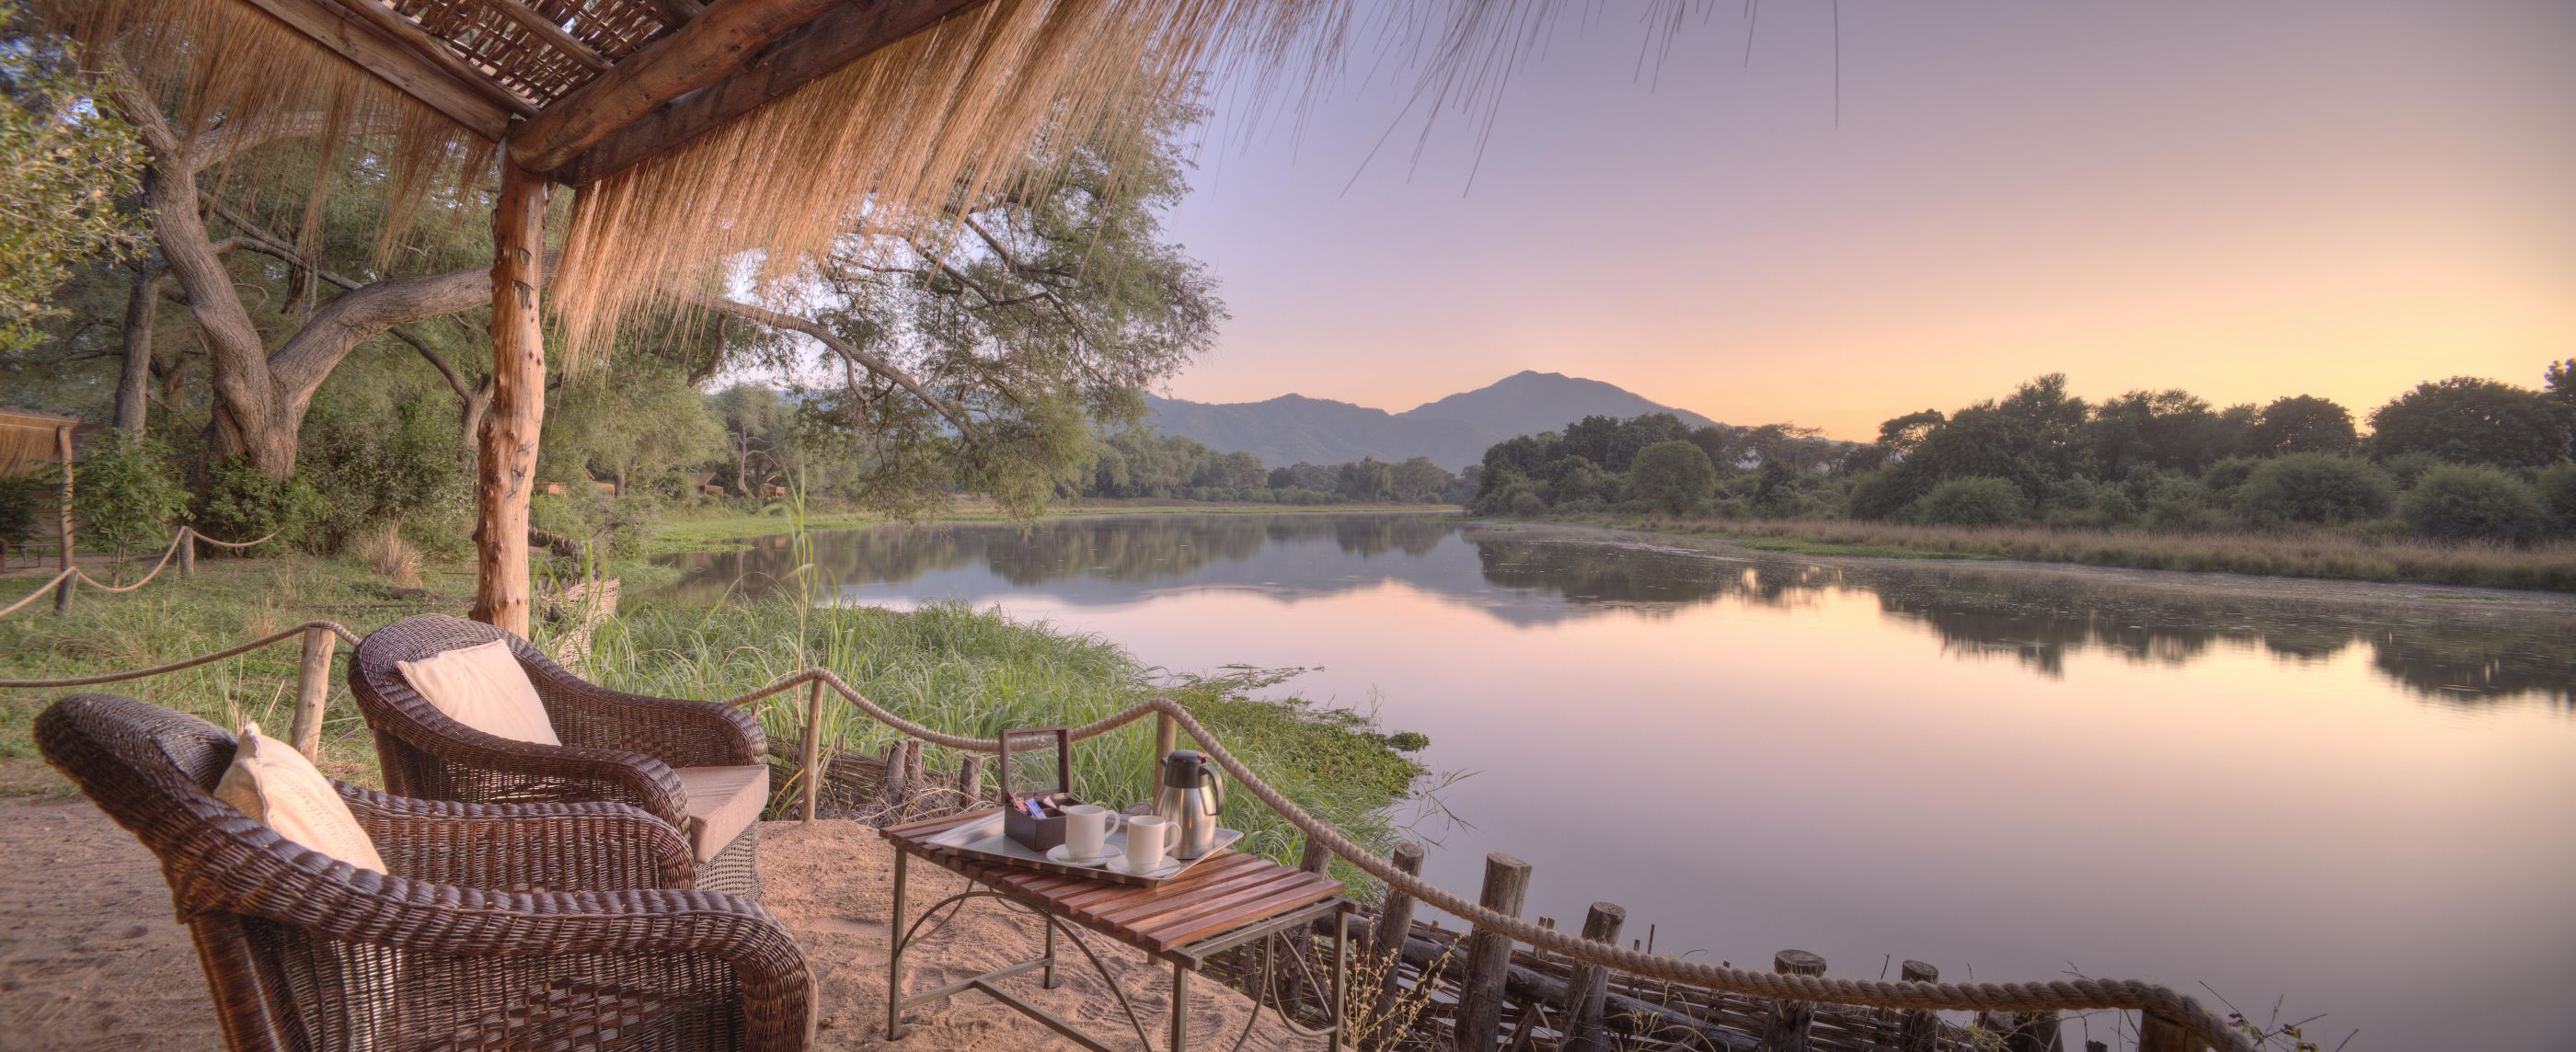 The view from Chongwe River Camp